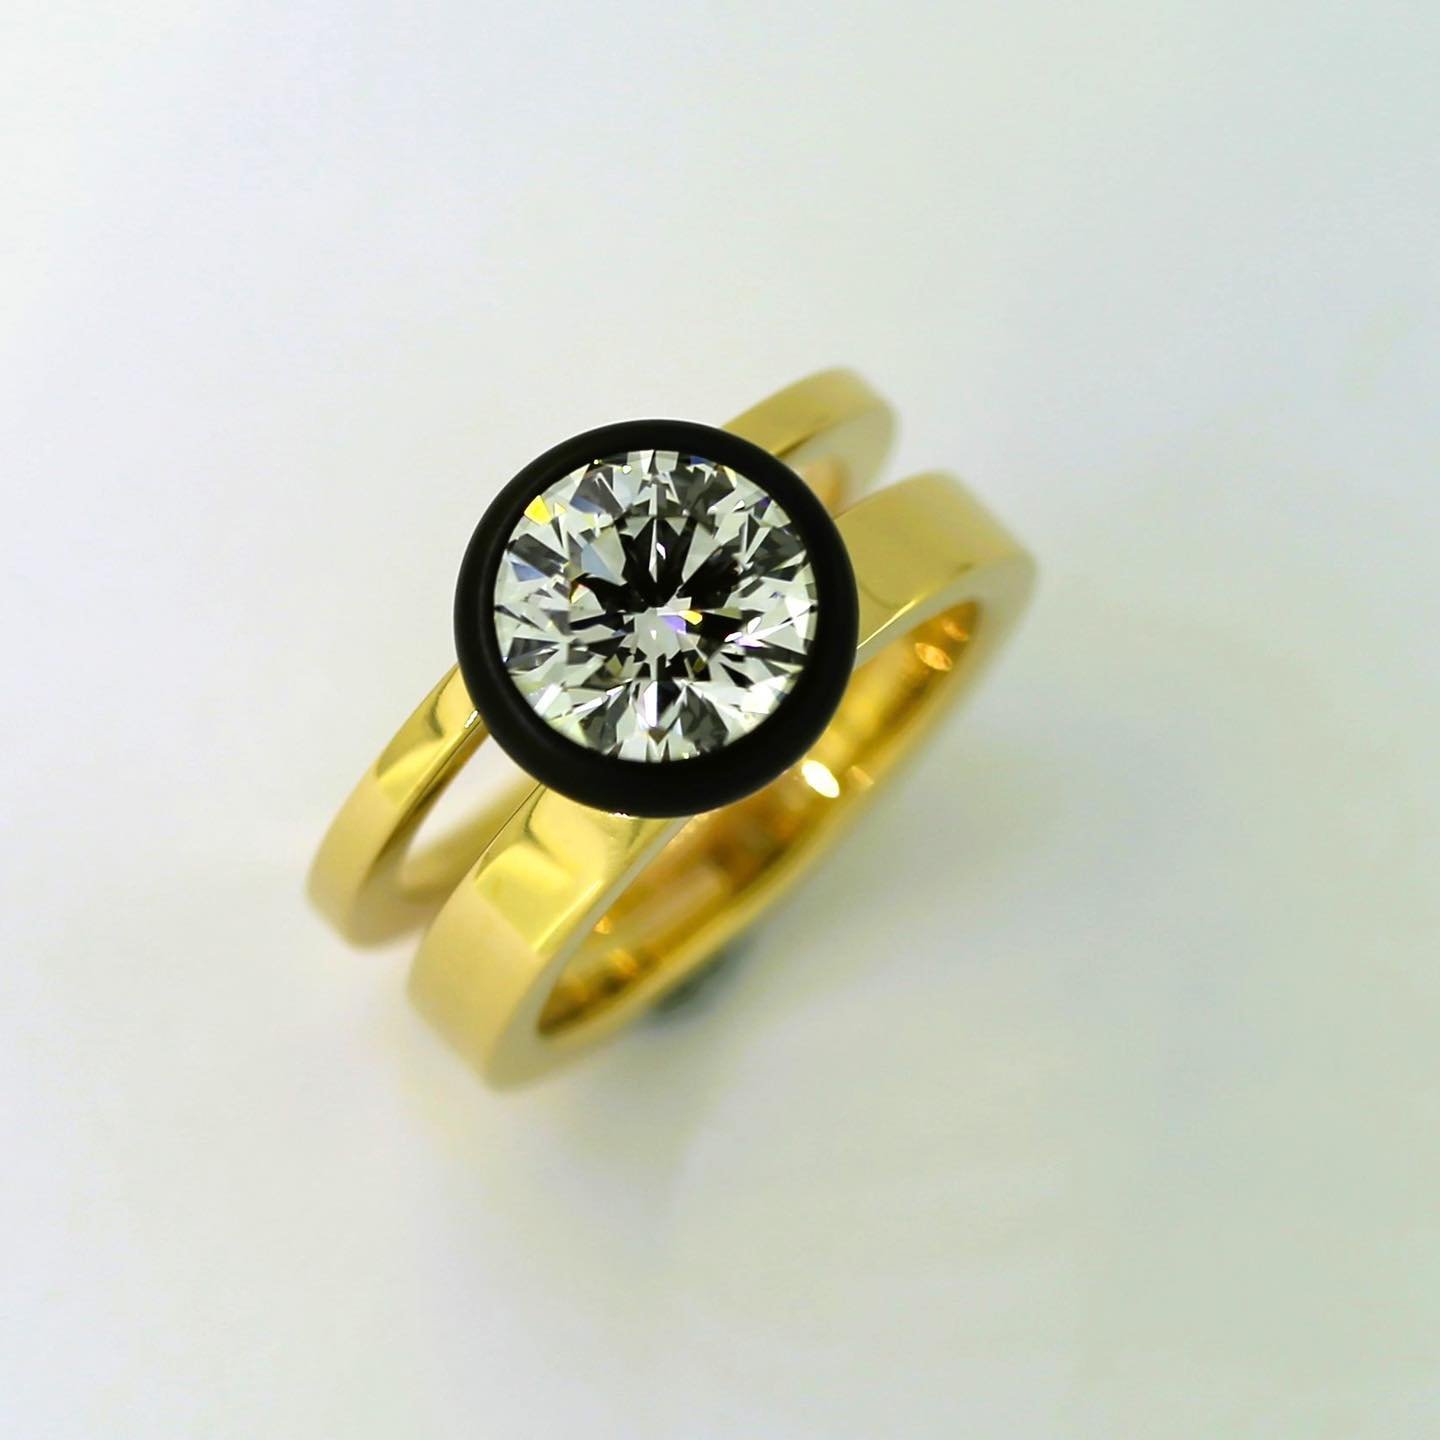 18K Yellow Gold ring with 3.03 Ct Round Diamond set into the Iron bezel #casual #handmade